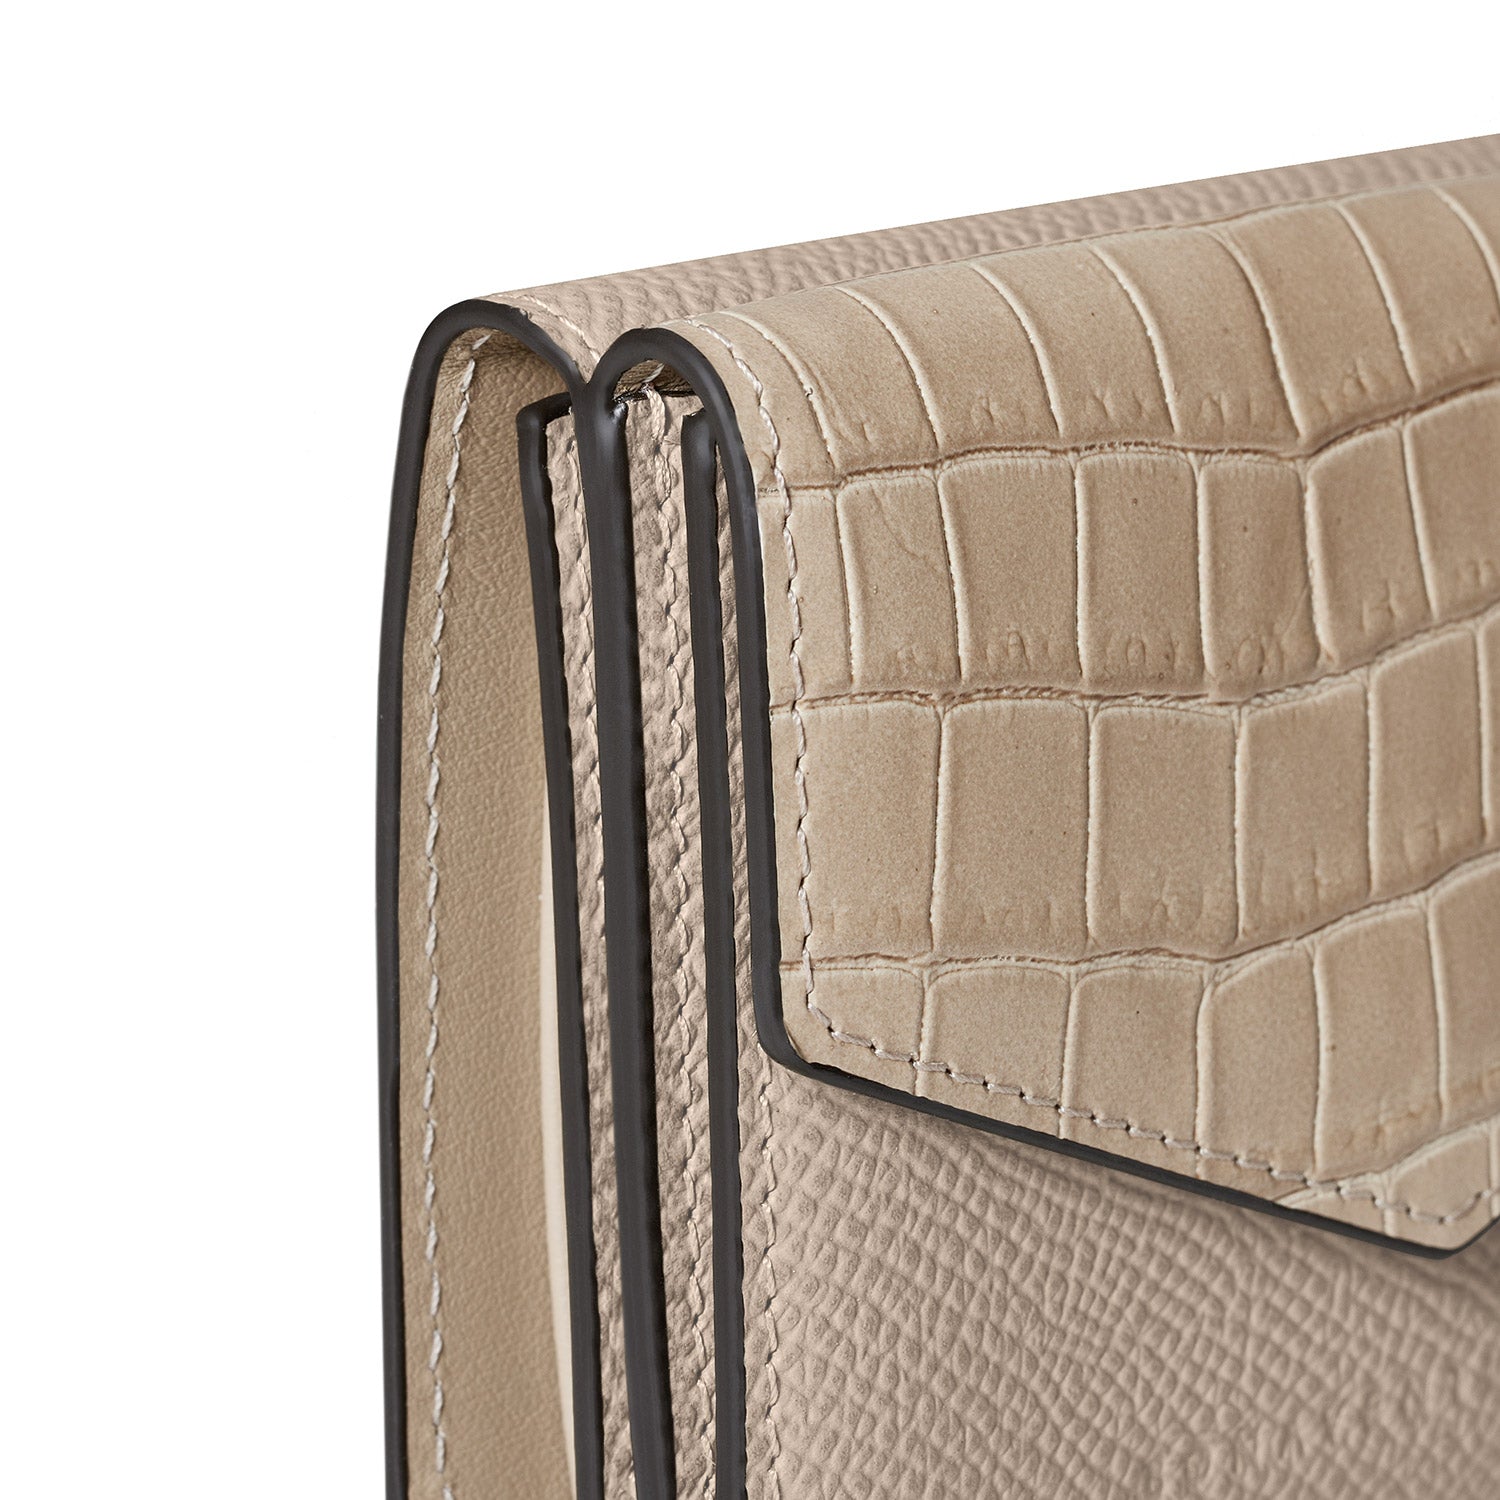 Small wallet in Noblesse and embossed crocodile leather